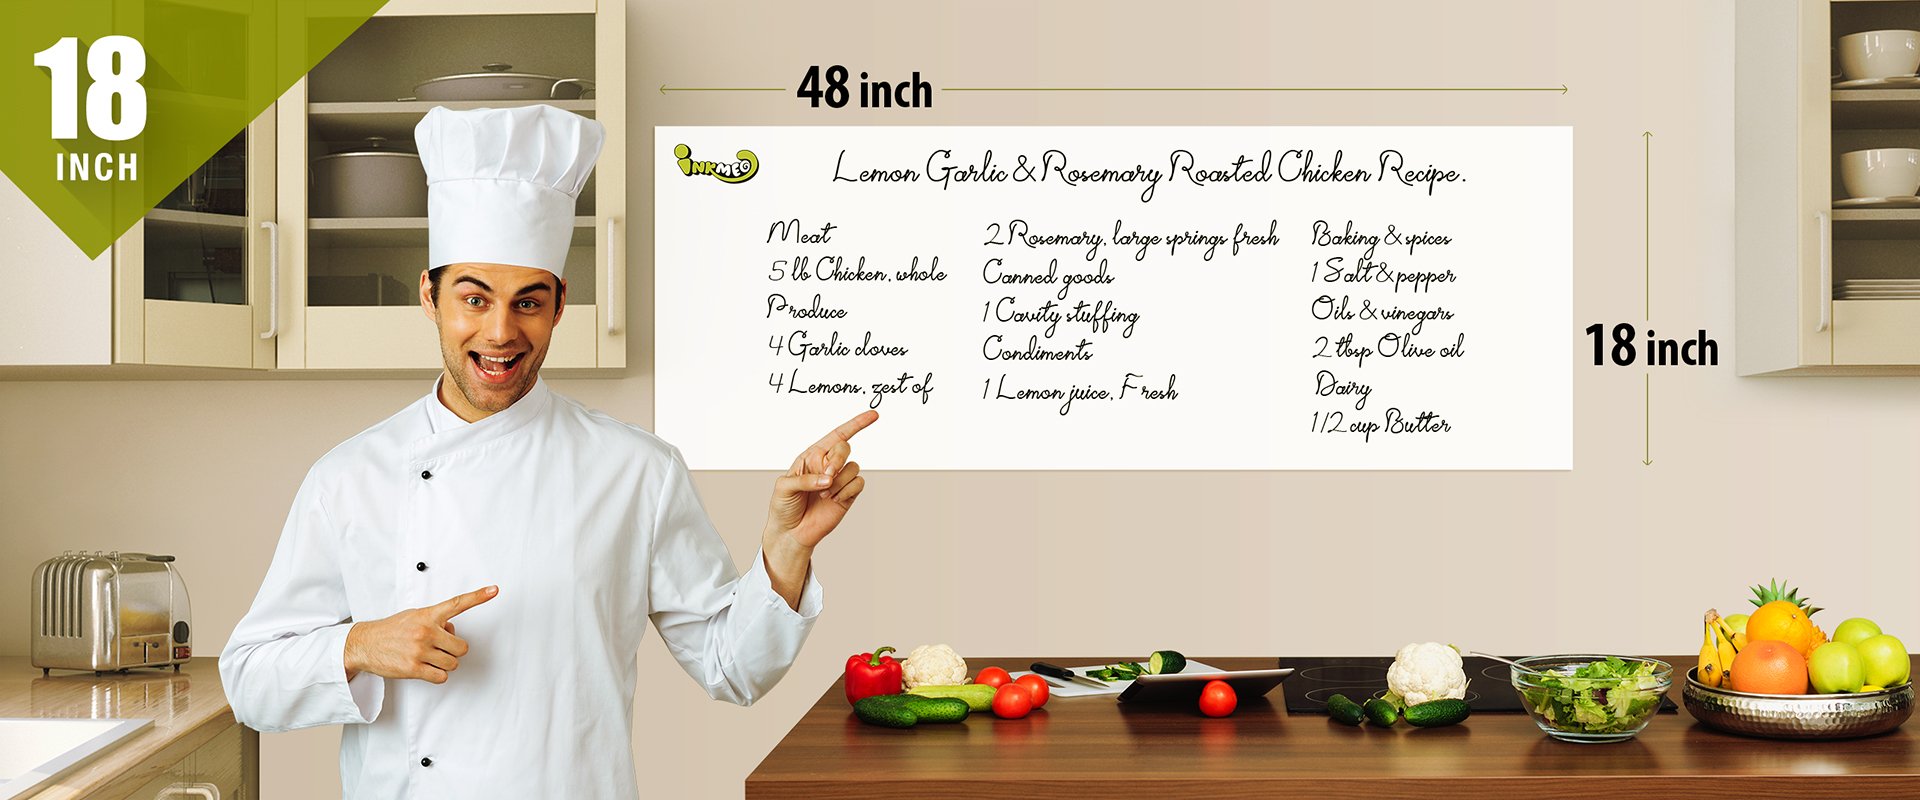 The image depicts a chef pointing to the recipes on the white sheet with size mentioned as 18*48 inches